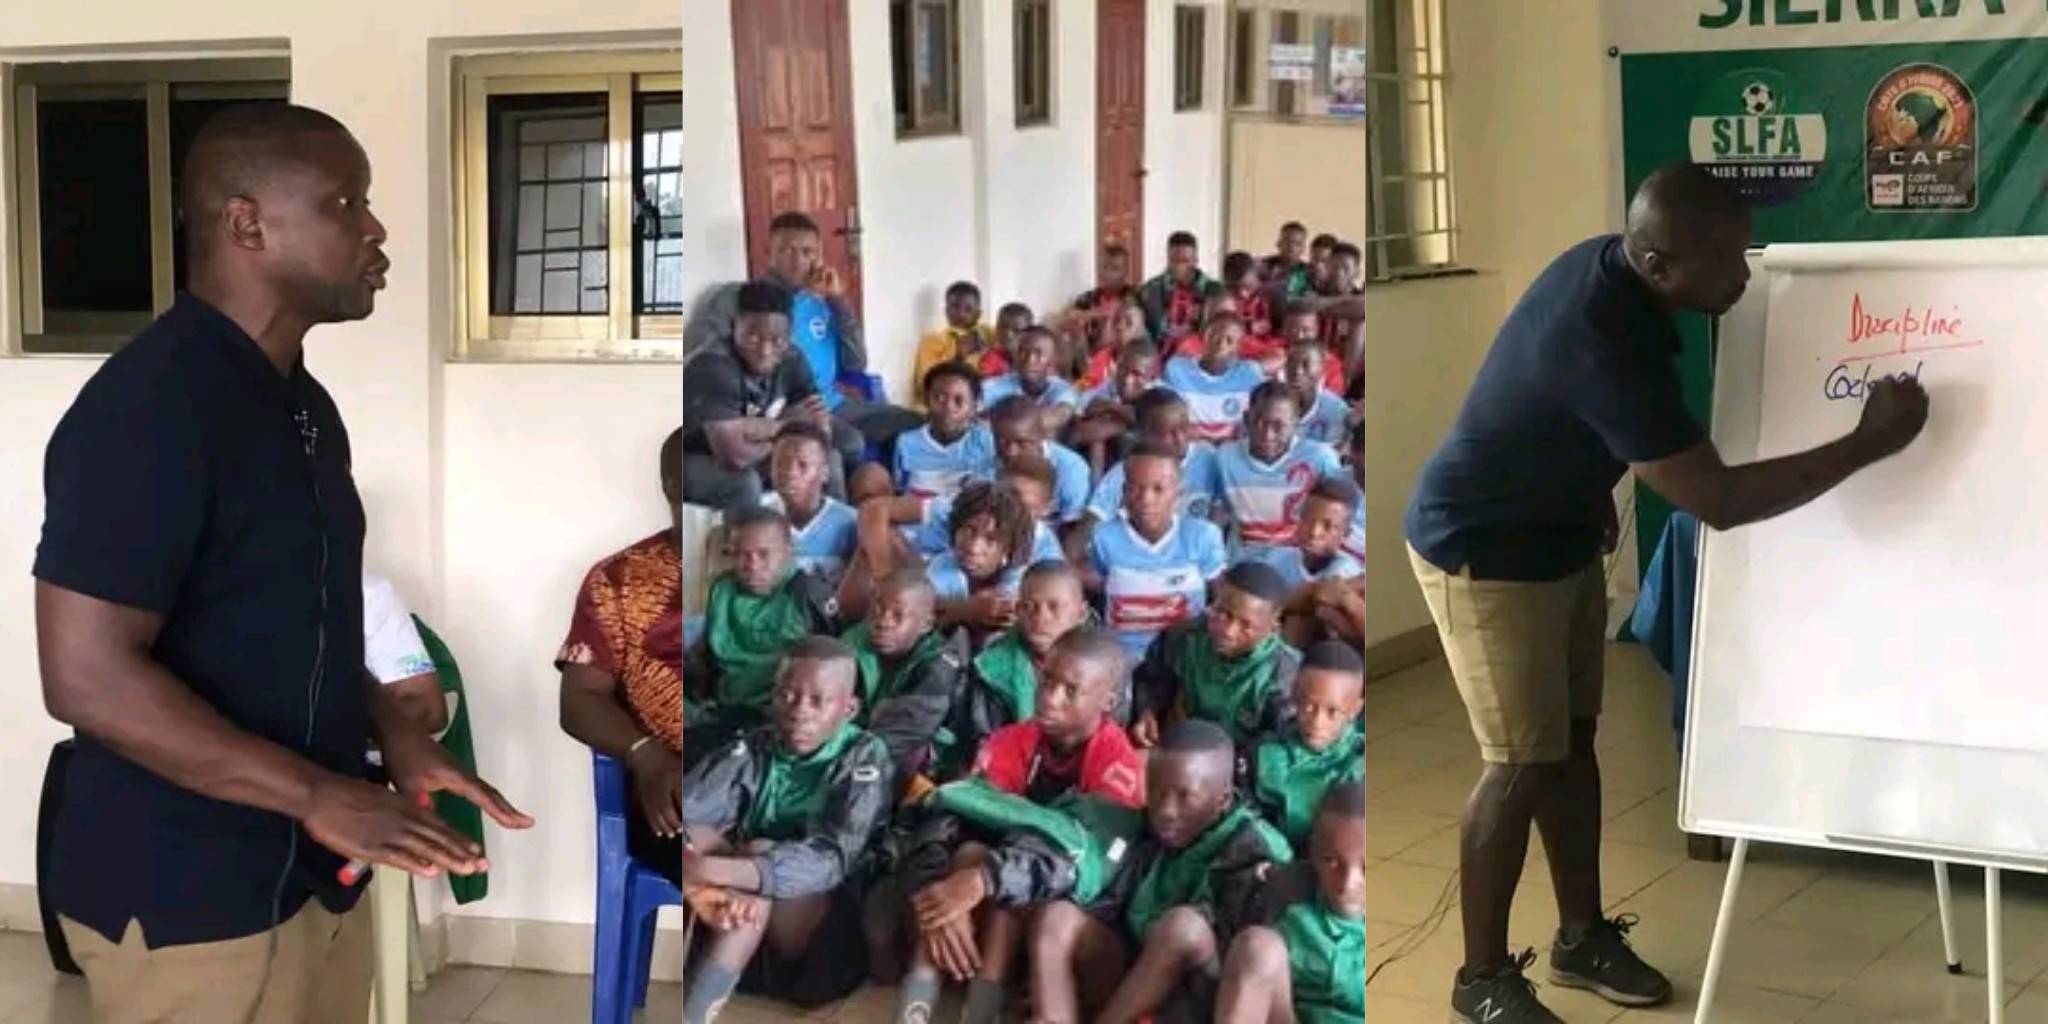 Leone Stars Head Coach, John Keister Delivers Motivational Message to Orthodox Football Club